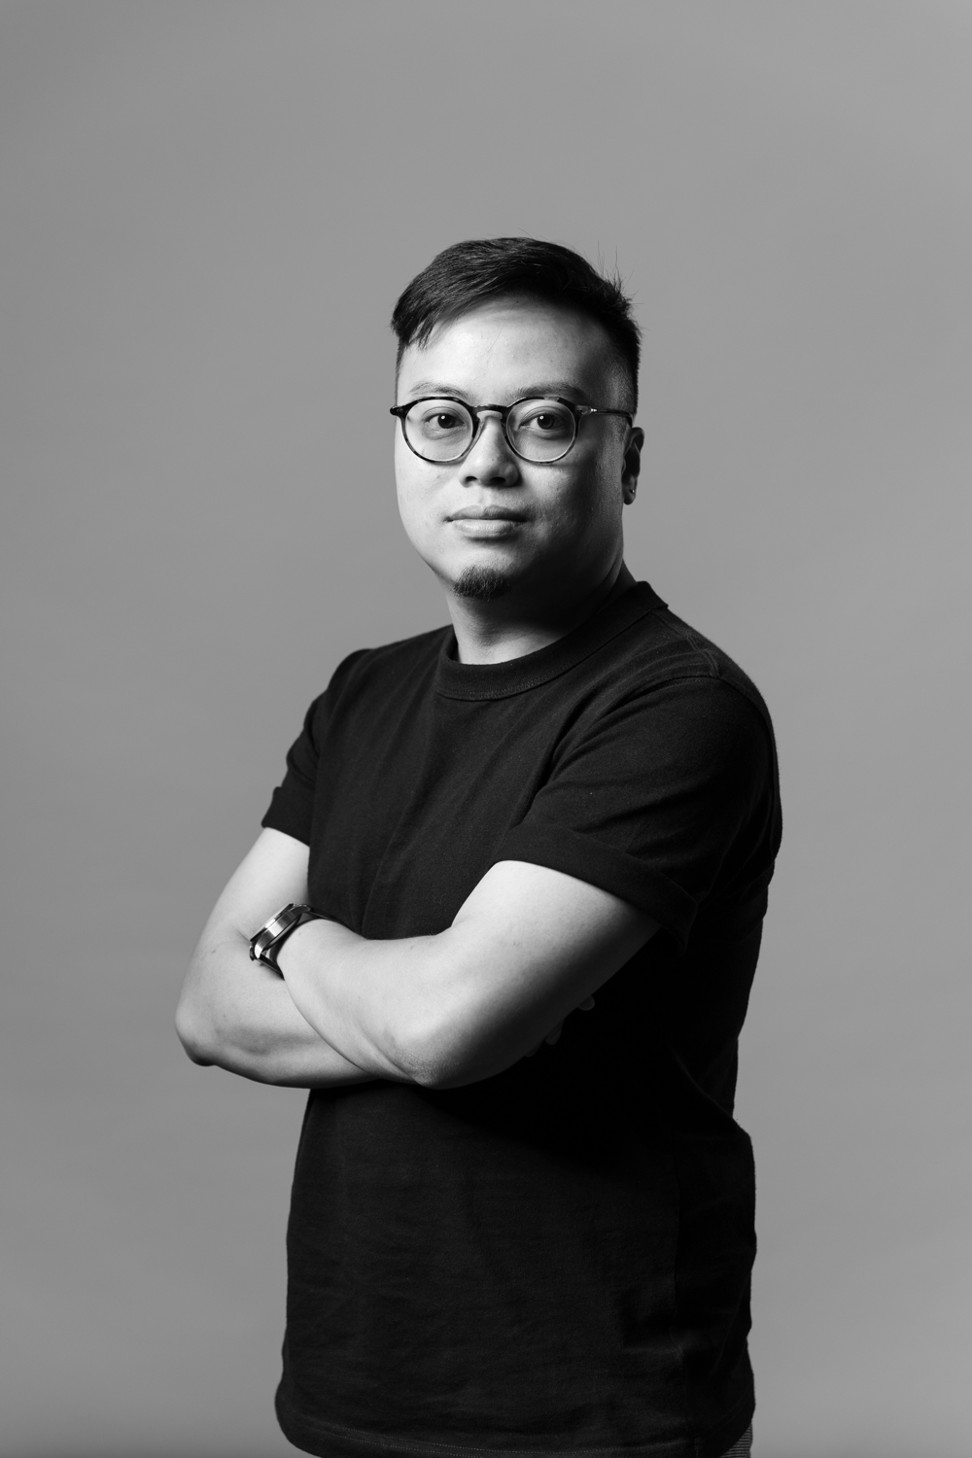 Stephen Chung, one of the app’s co-founders. Photo: Breakup Tours